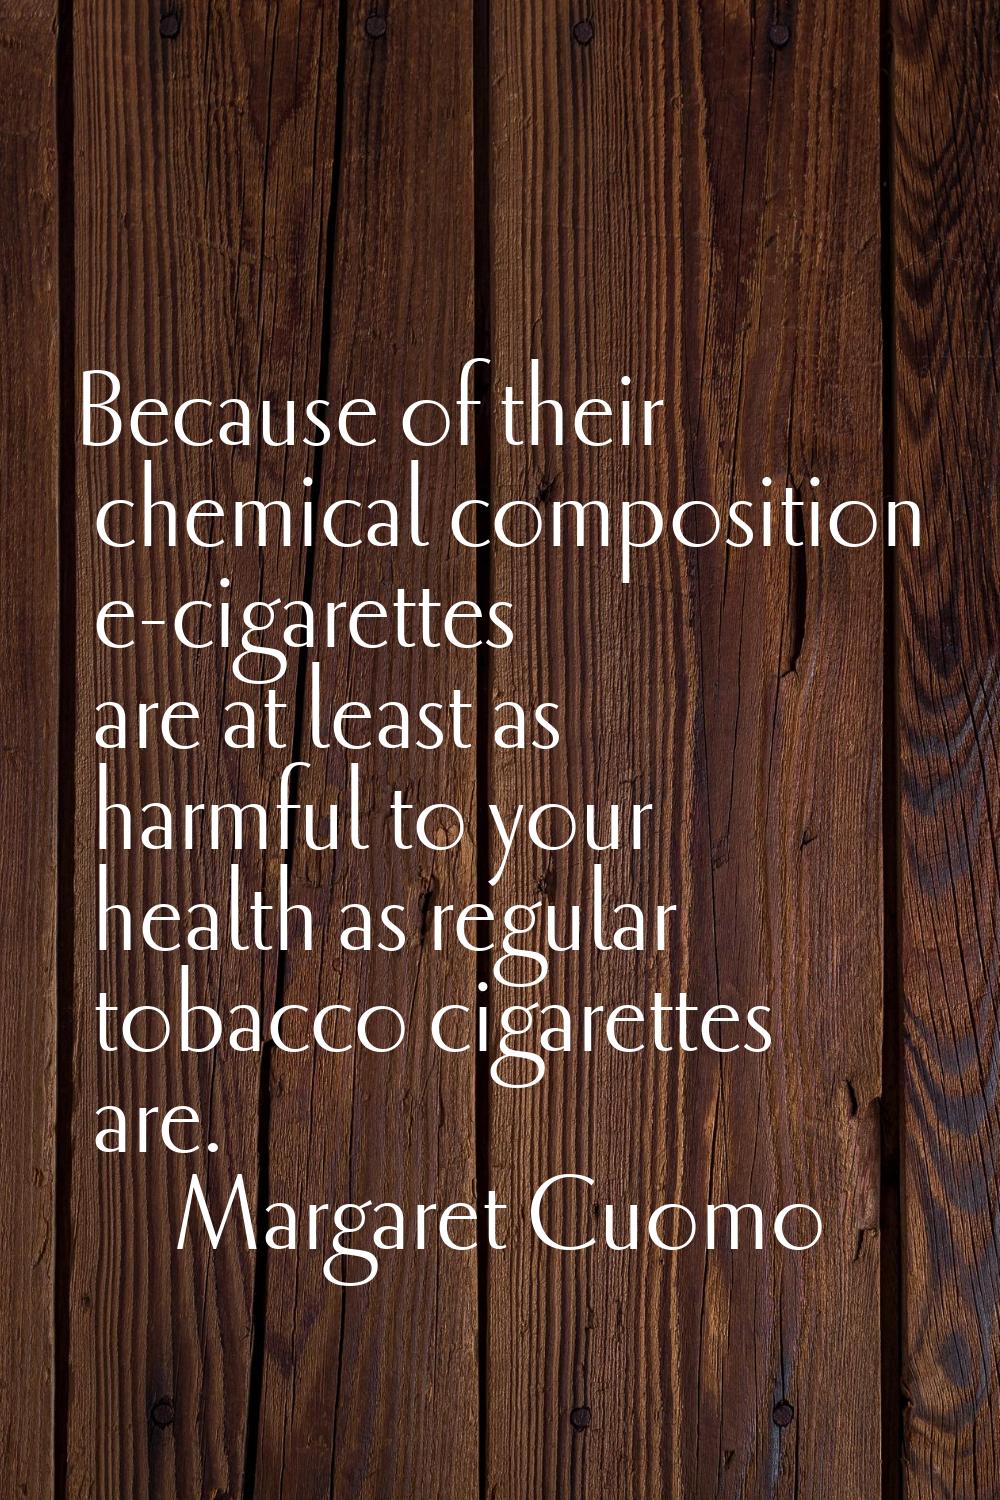 Because of their chemical composition e-cigarettes are at least as harmful to your health as regula